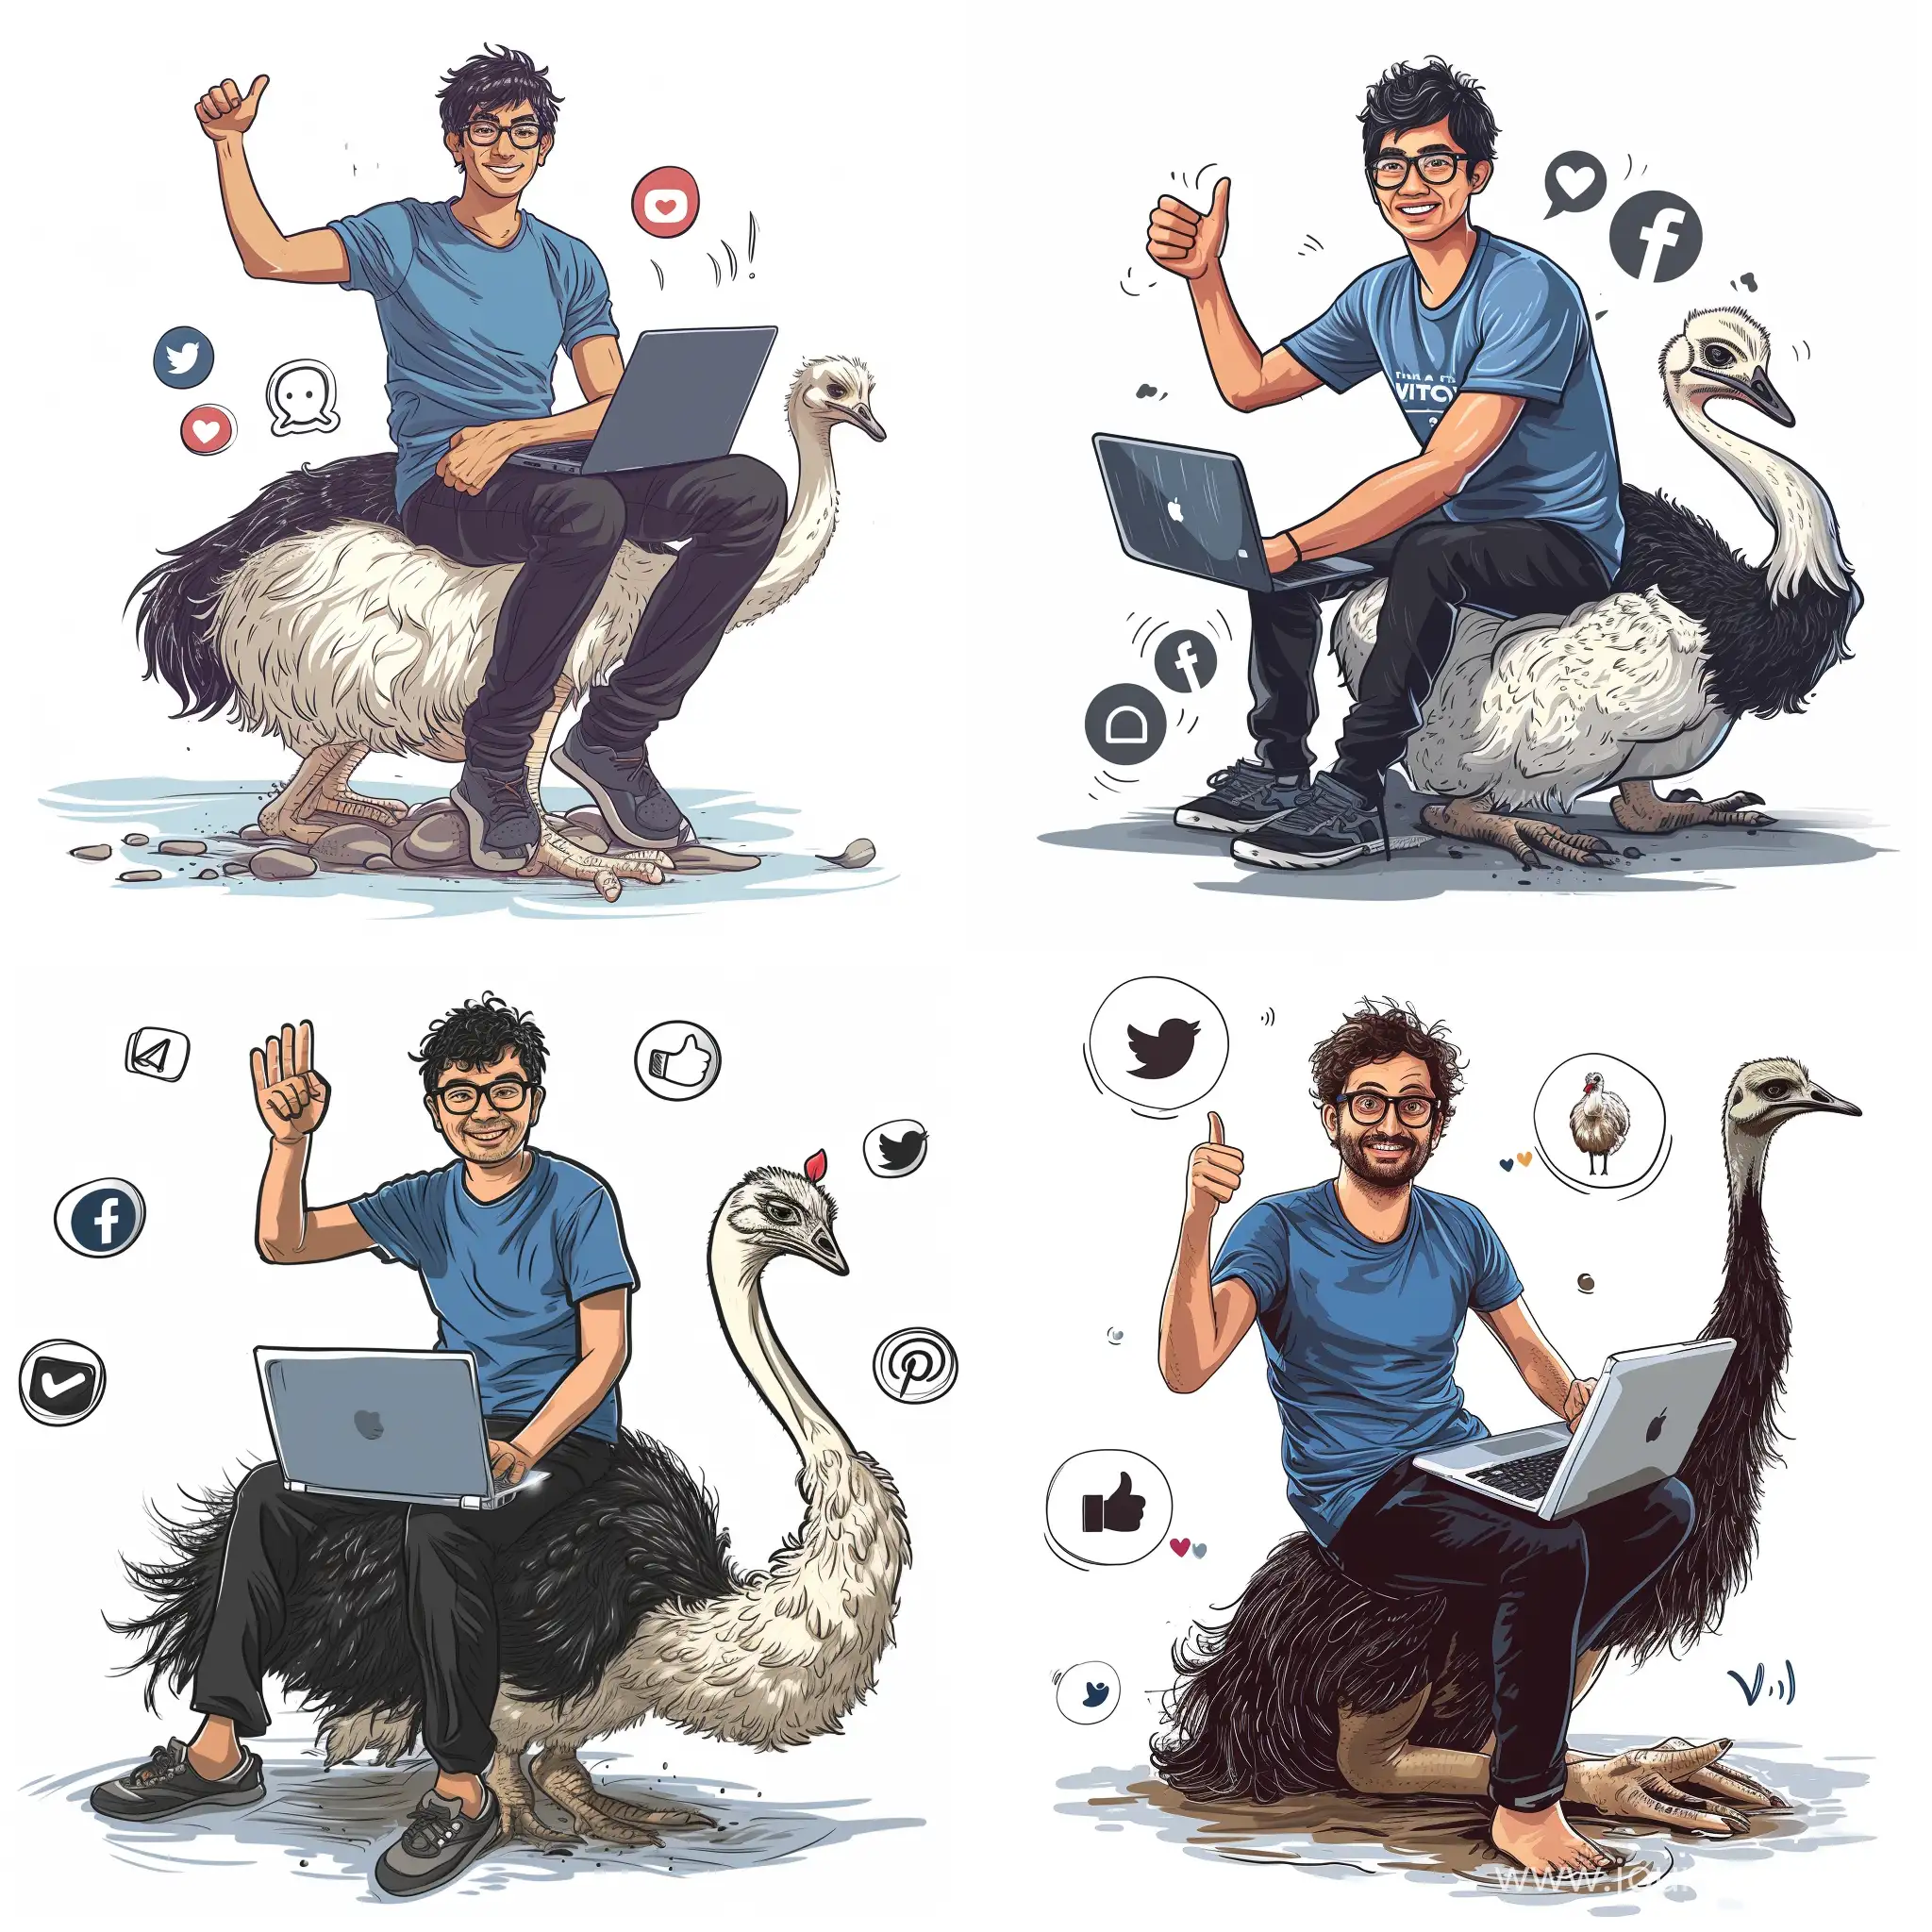 A 25-year-old man wearing glasses, blue T-shirt and black pants, in front of a laptop.  He appears to be a programmer, waving with a thumbs up looking at the camera, sitting on an ostrich with its head hidden under the ground,and there are social media icons around. Victor sketch drawing illustrator style on white background. 